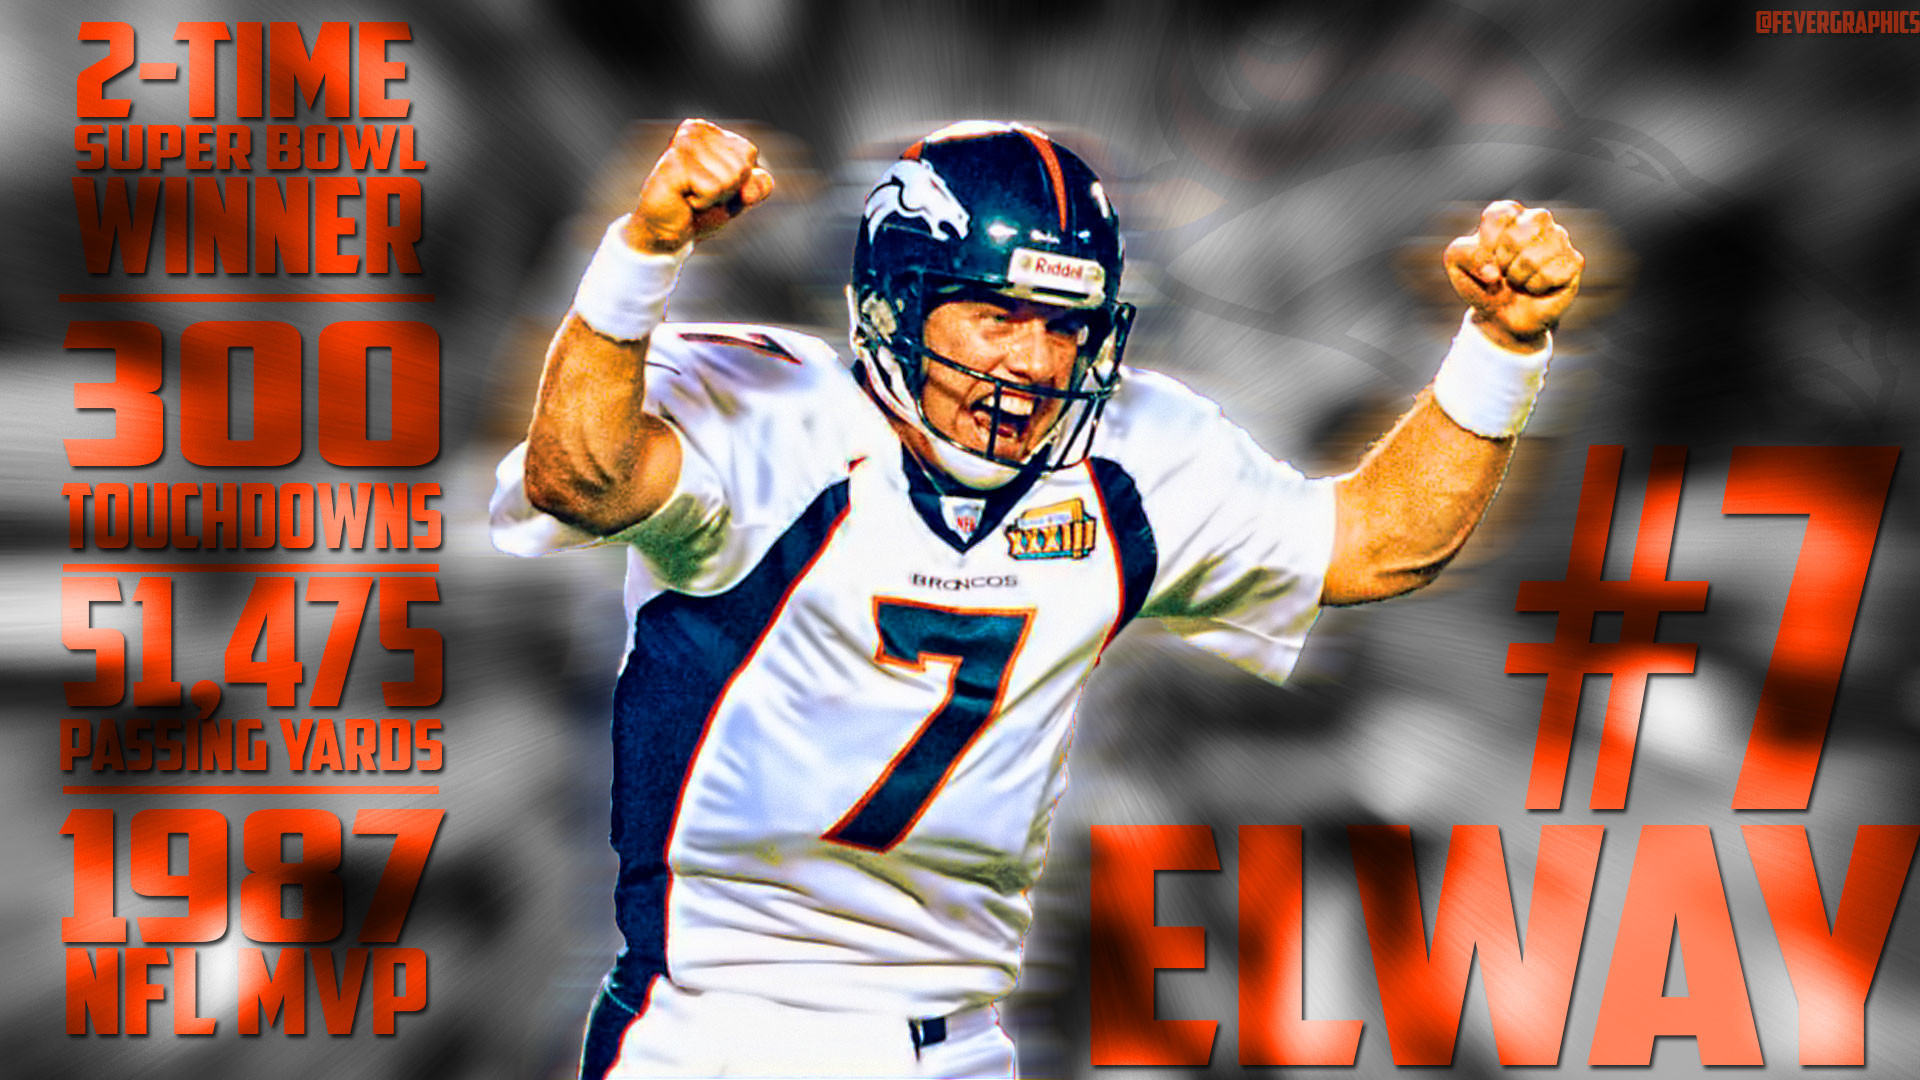 1920x1080 John Elway wallpaper for this Broncos sub! I hope you guys like it! I  worked really hard on it!